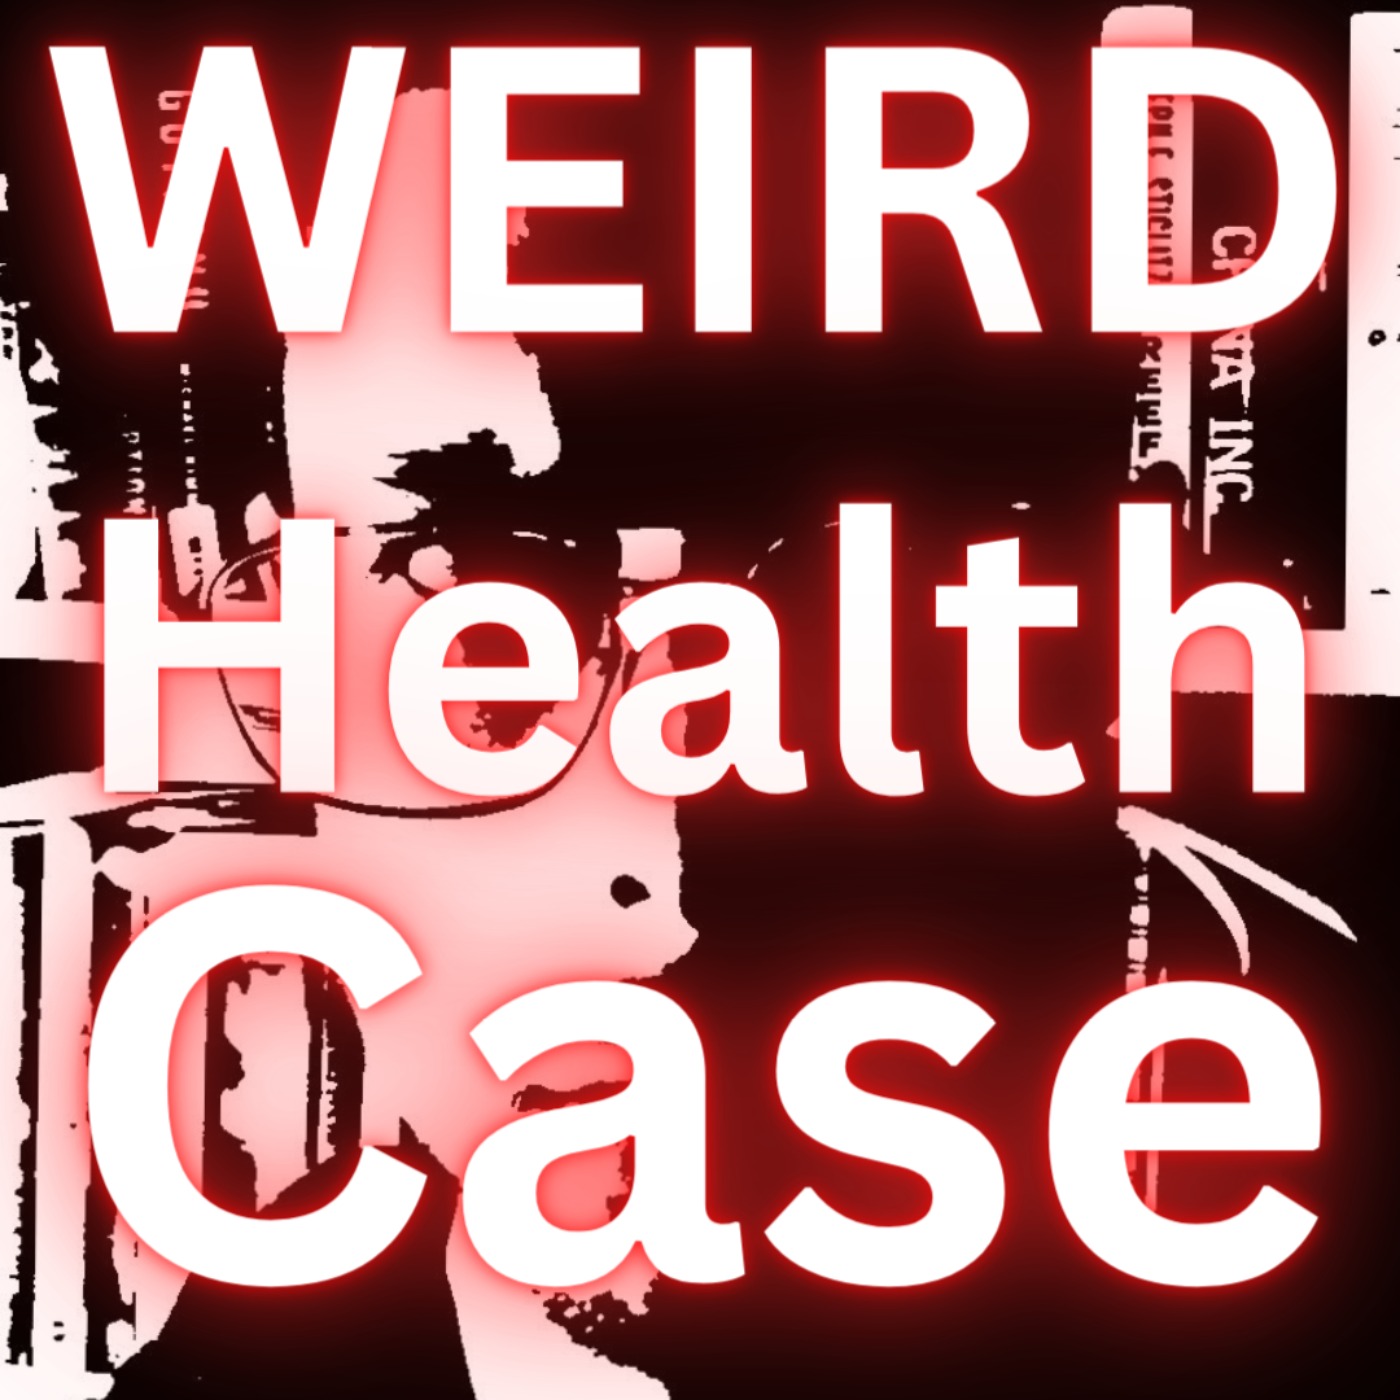 Weird Health Case! Important Lesson. With Amy McManus - Notus & Friends podcast